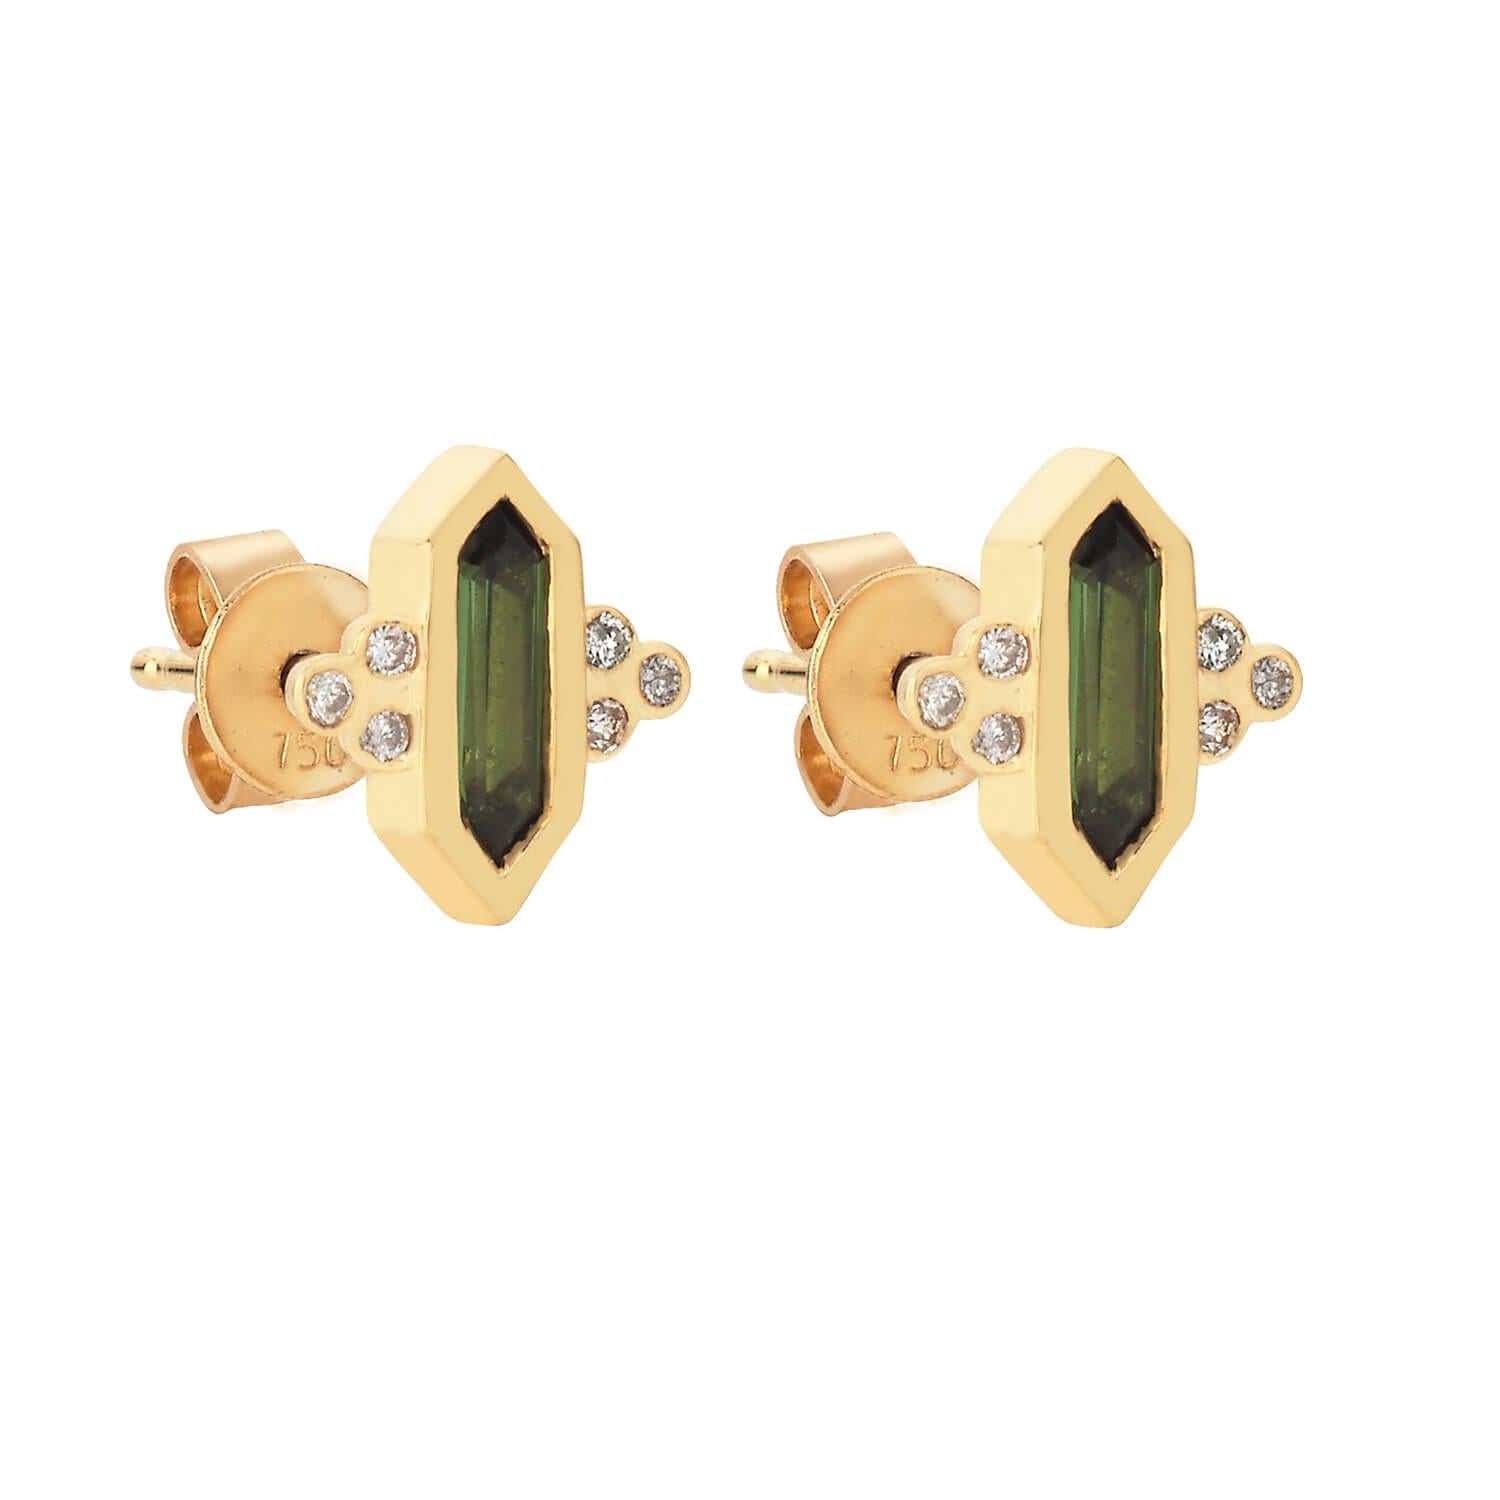 The Kalani stud features the crystal cut set in an 18k gold frame to perfectly compliment the charm of its geometrical shape. Diamonds adorn either side to create a beaded detailing effect, that sit next to the crystal cut Green Tourmaline just as